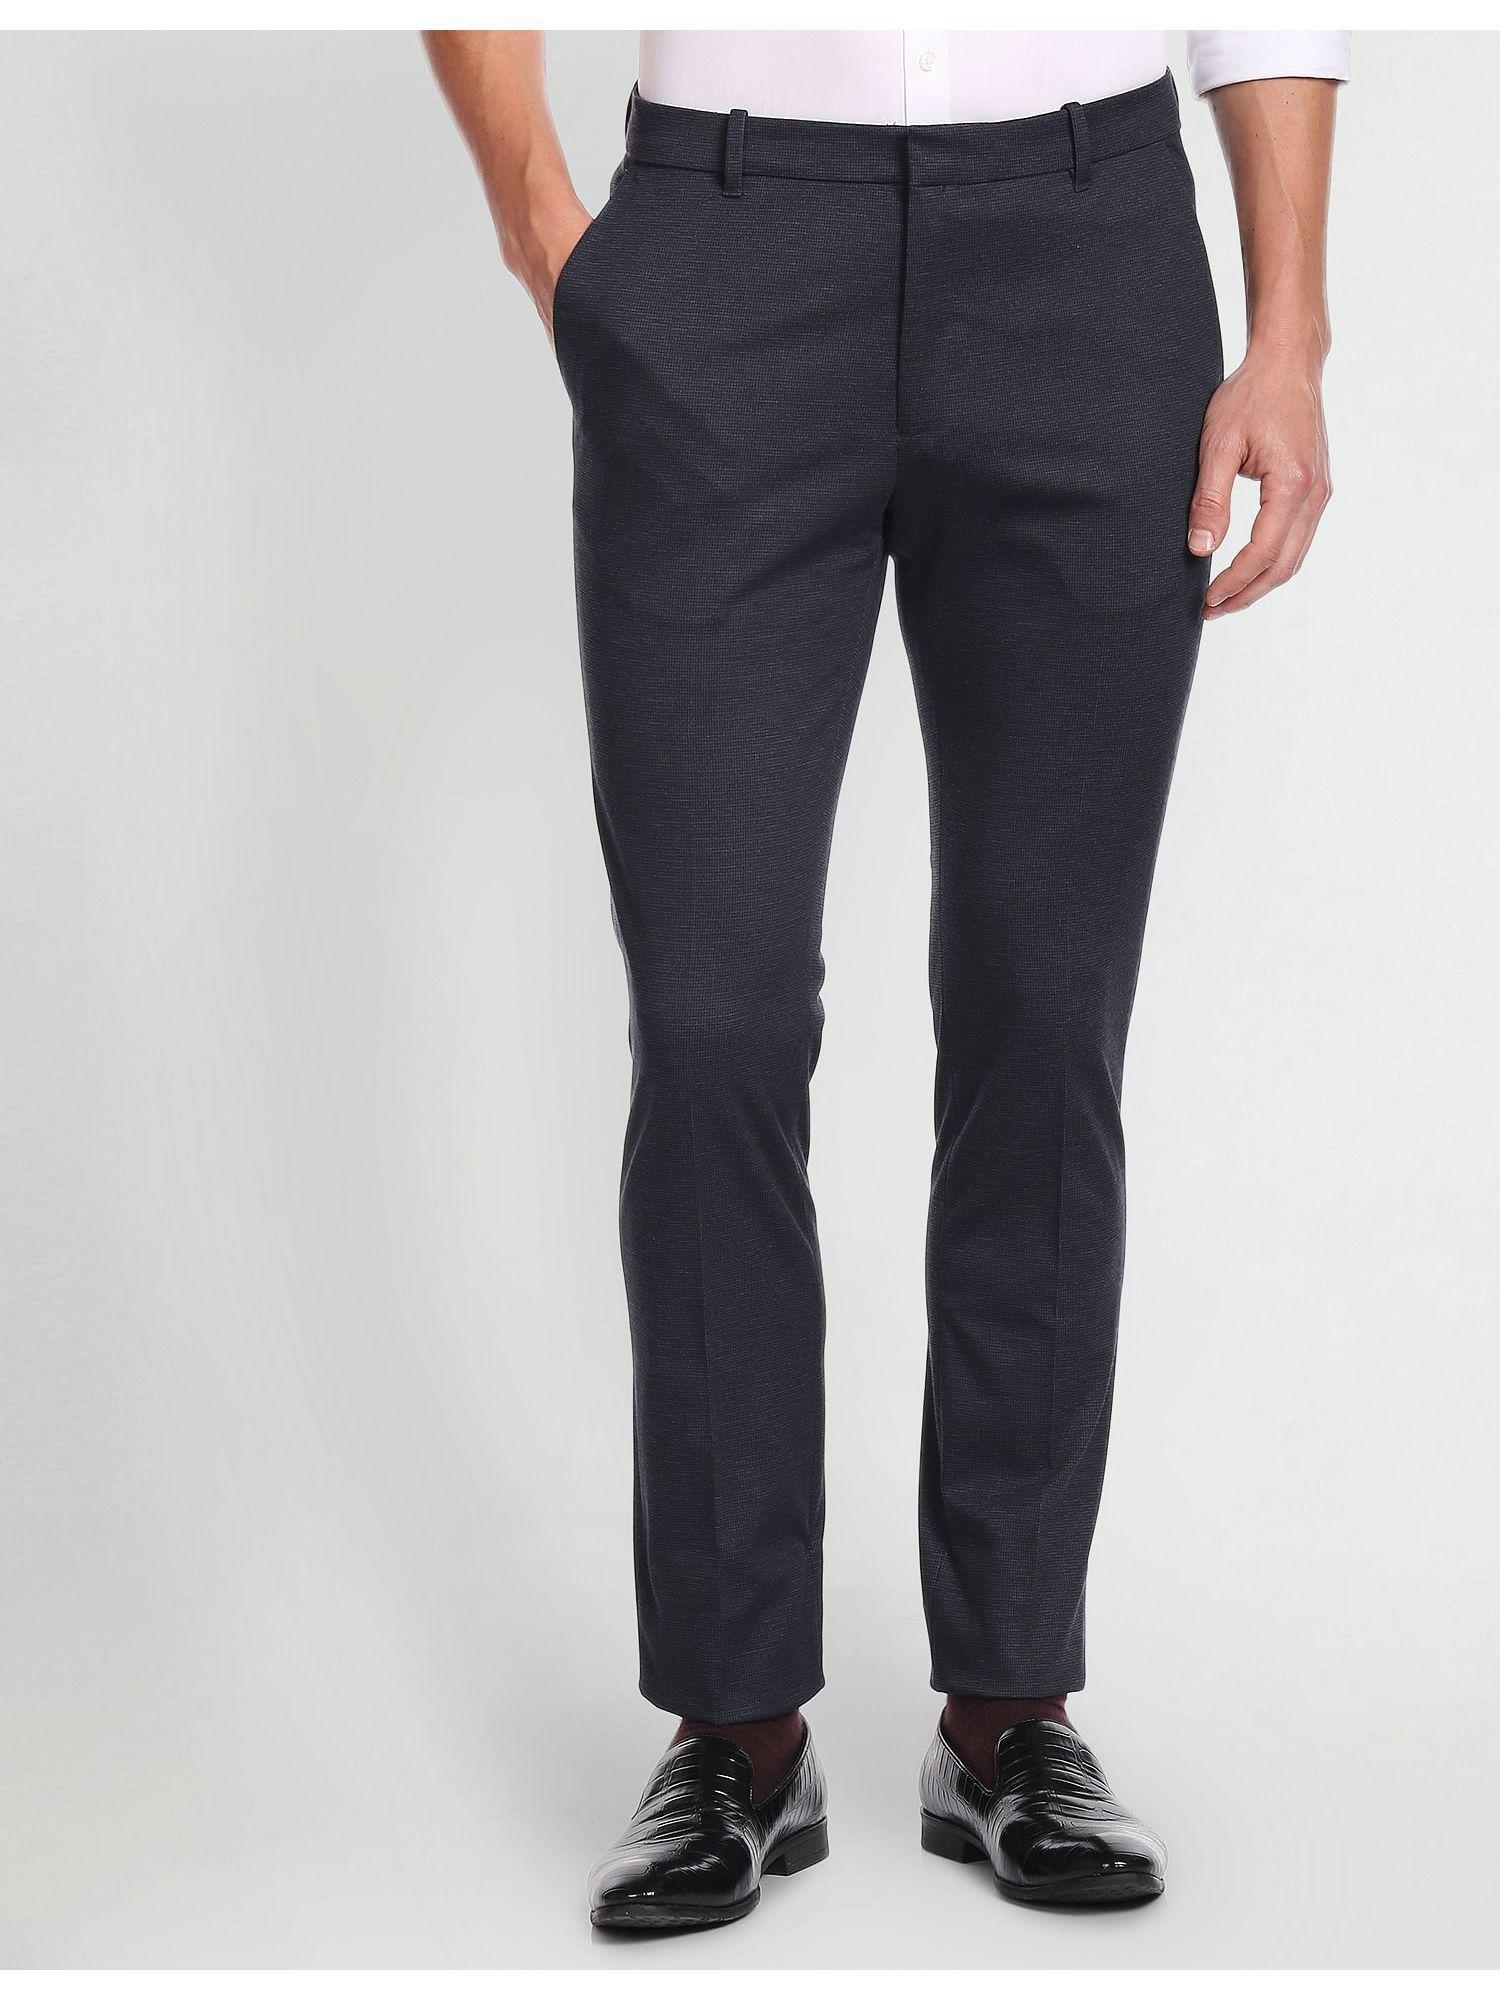 Micro Check Super Slim Fit Navy Blue Trousers